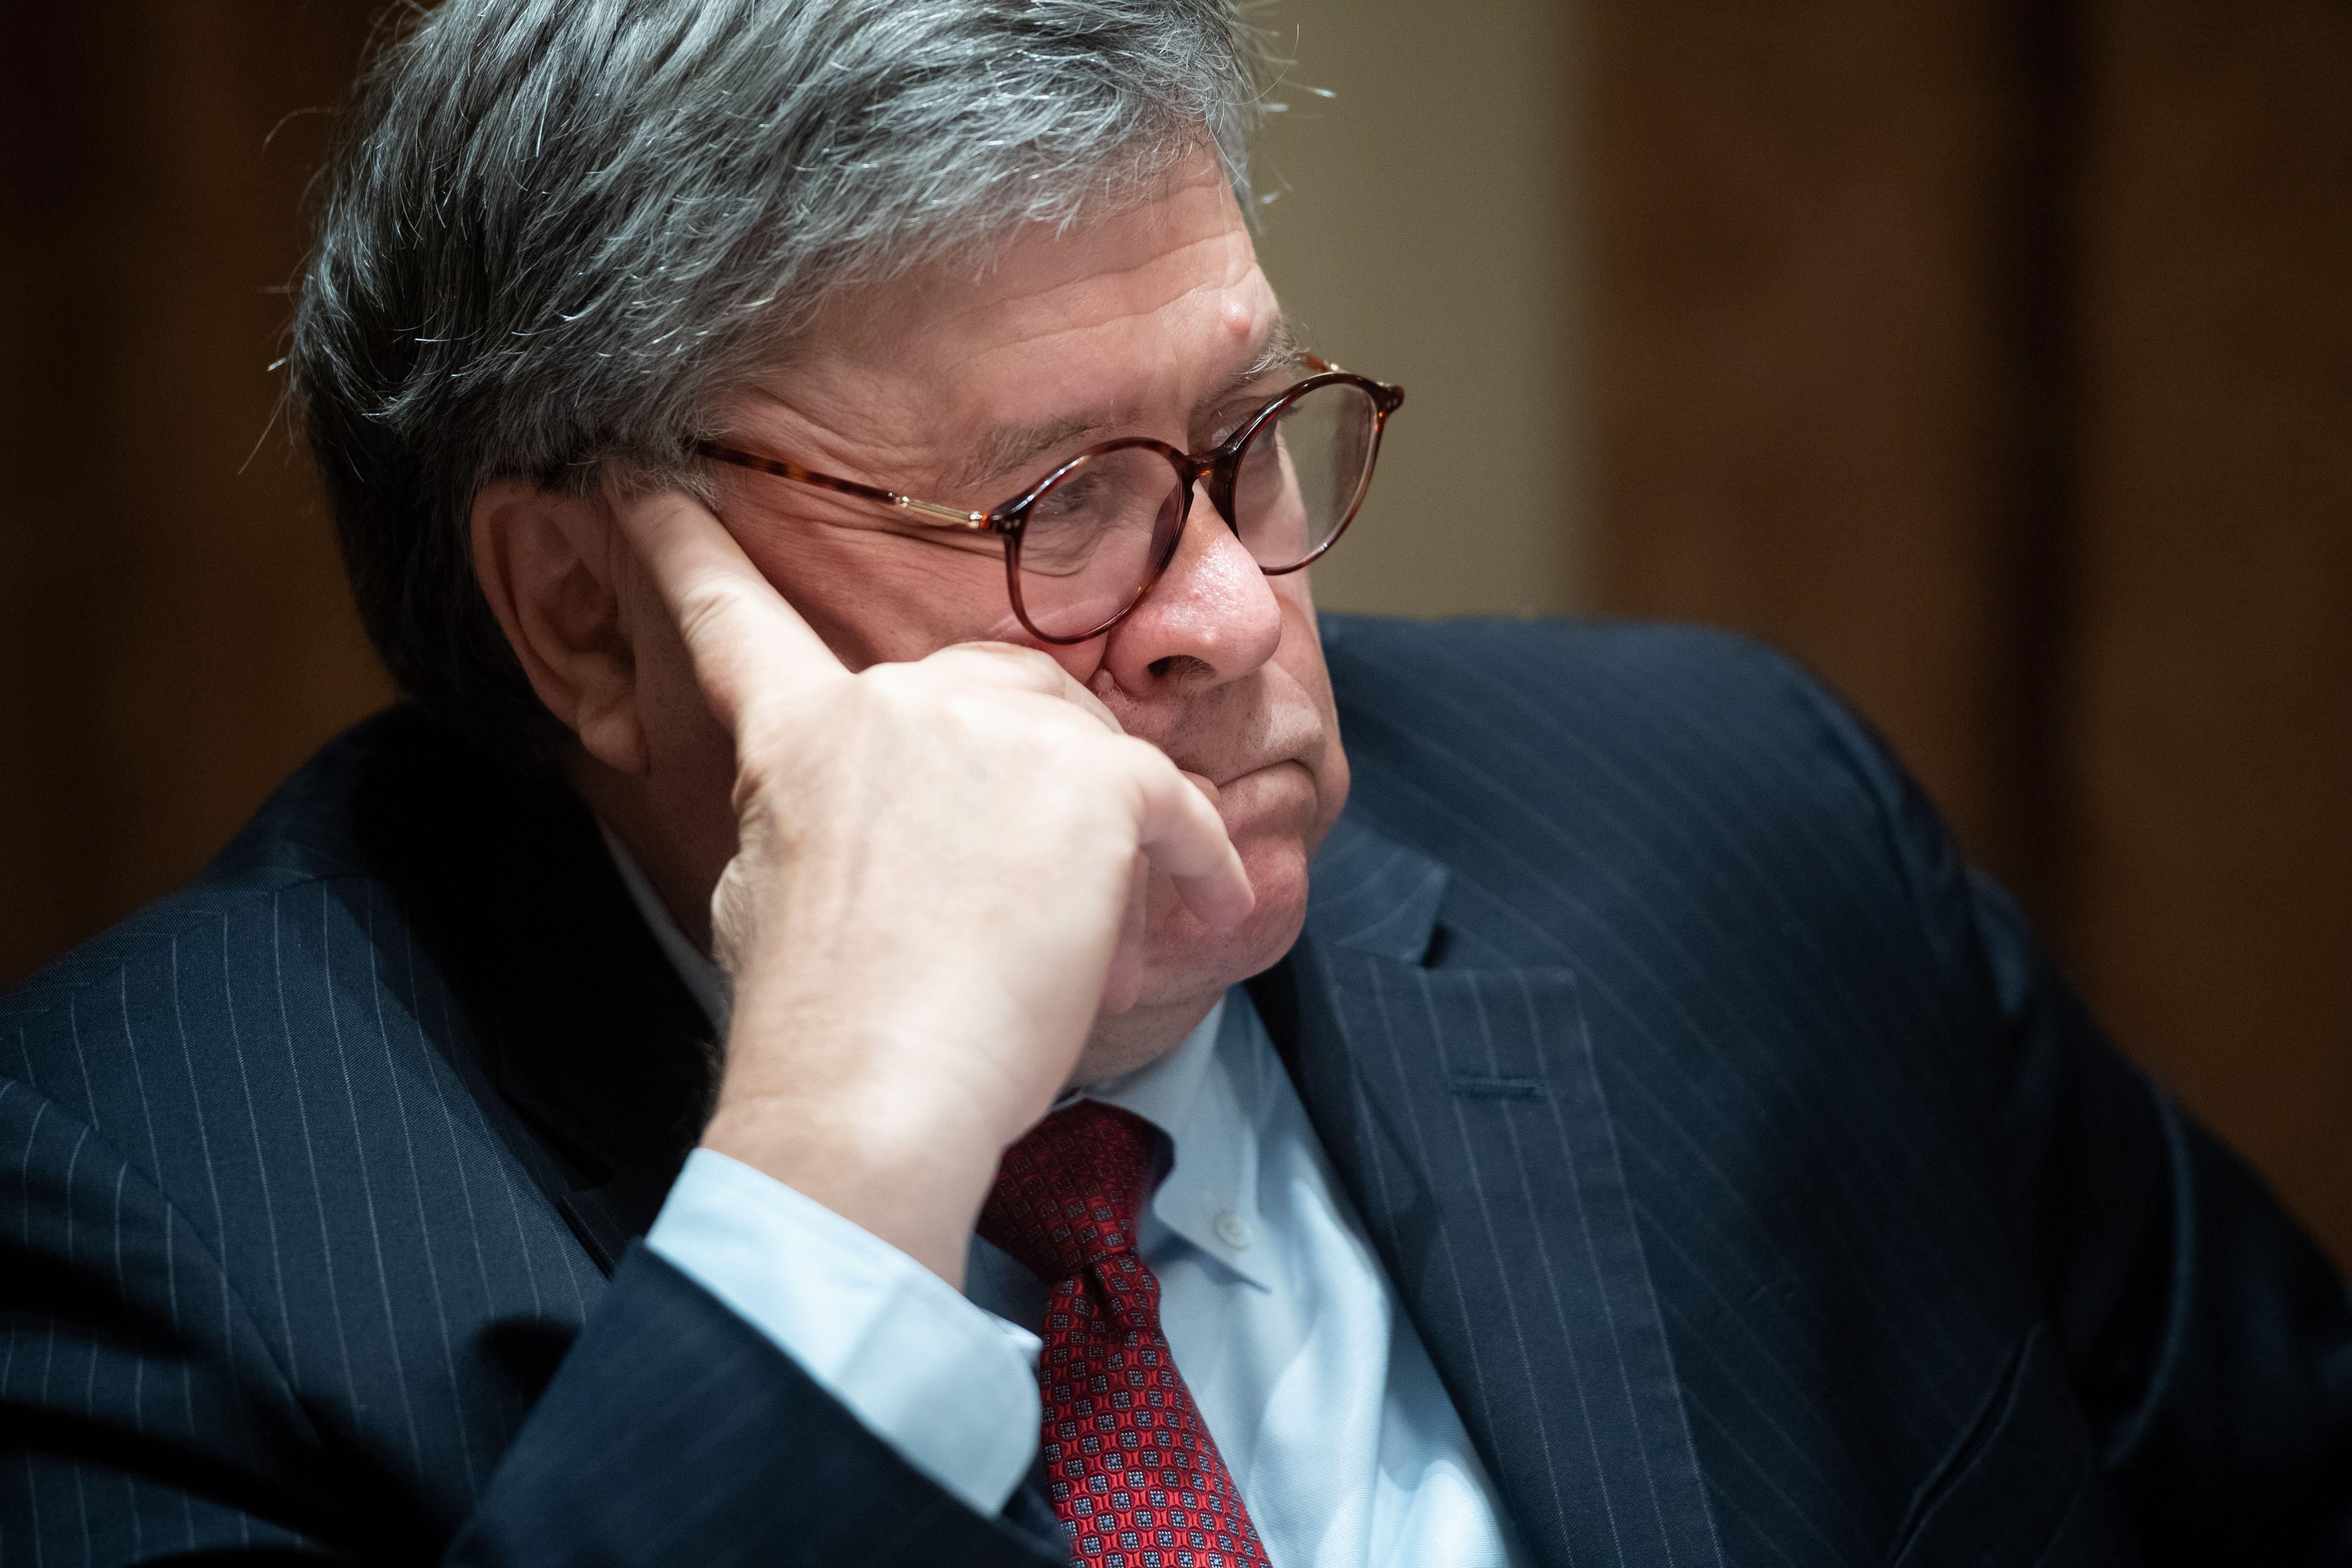 Bill Barr sits at a table, hand to his head.